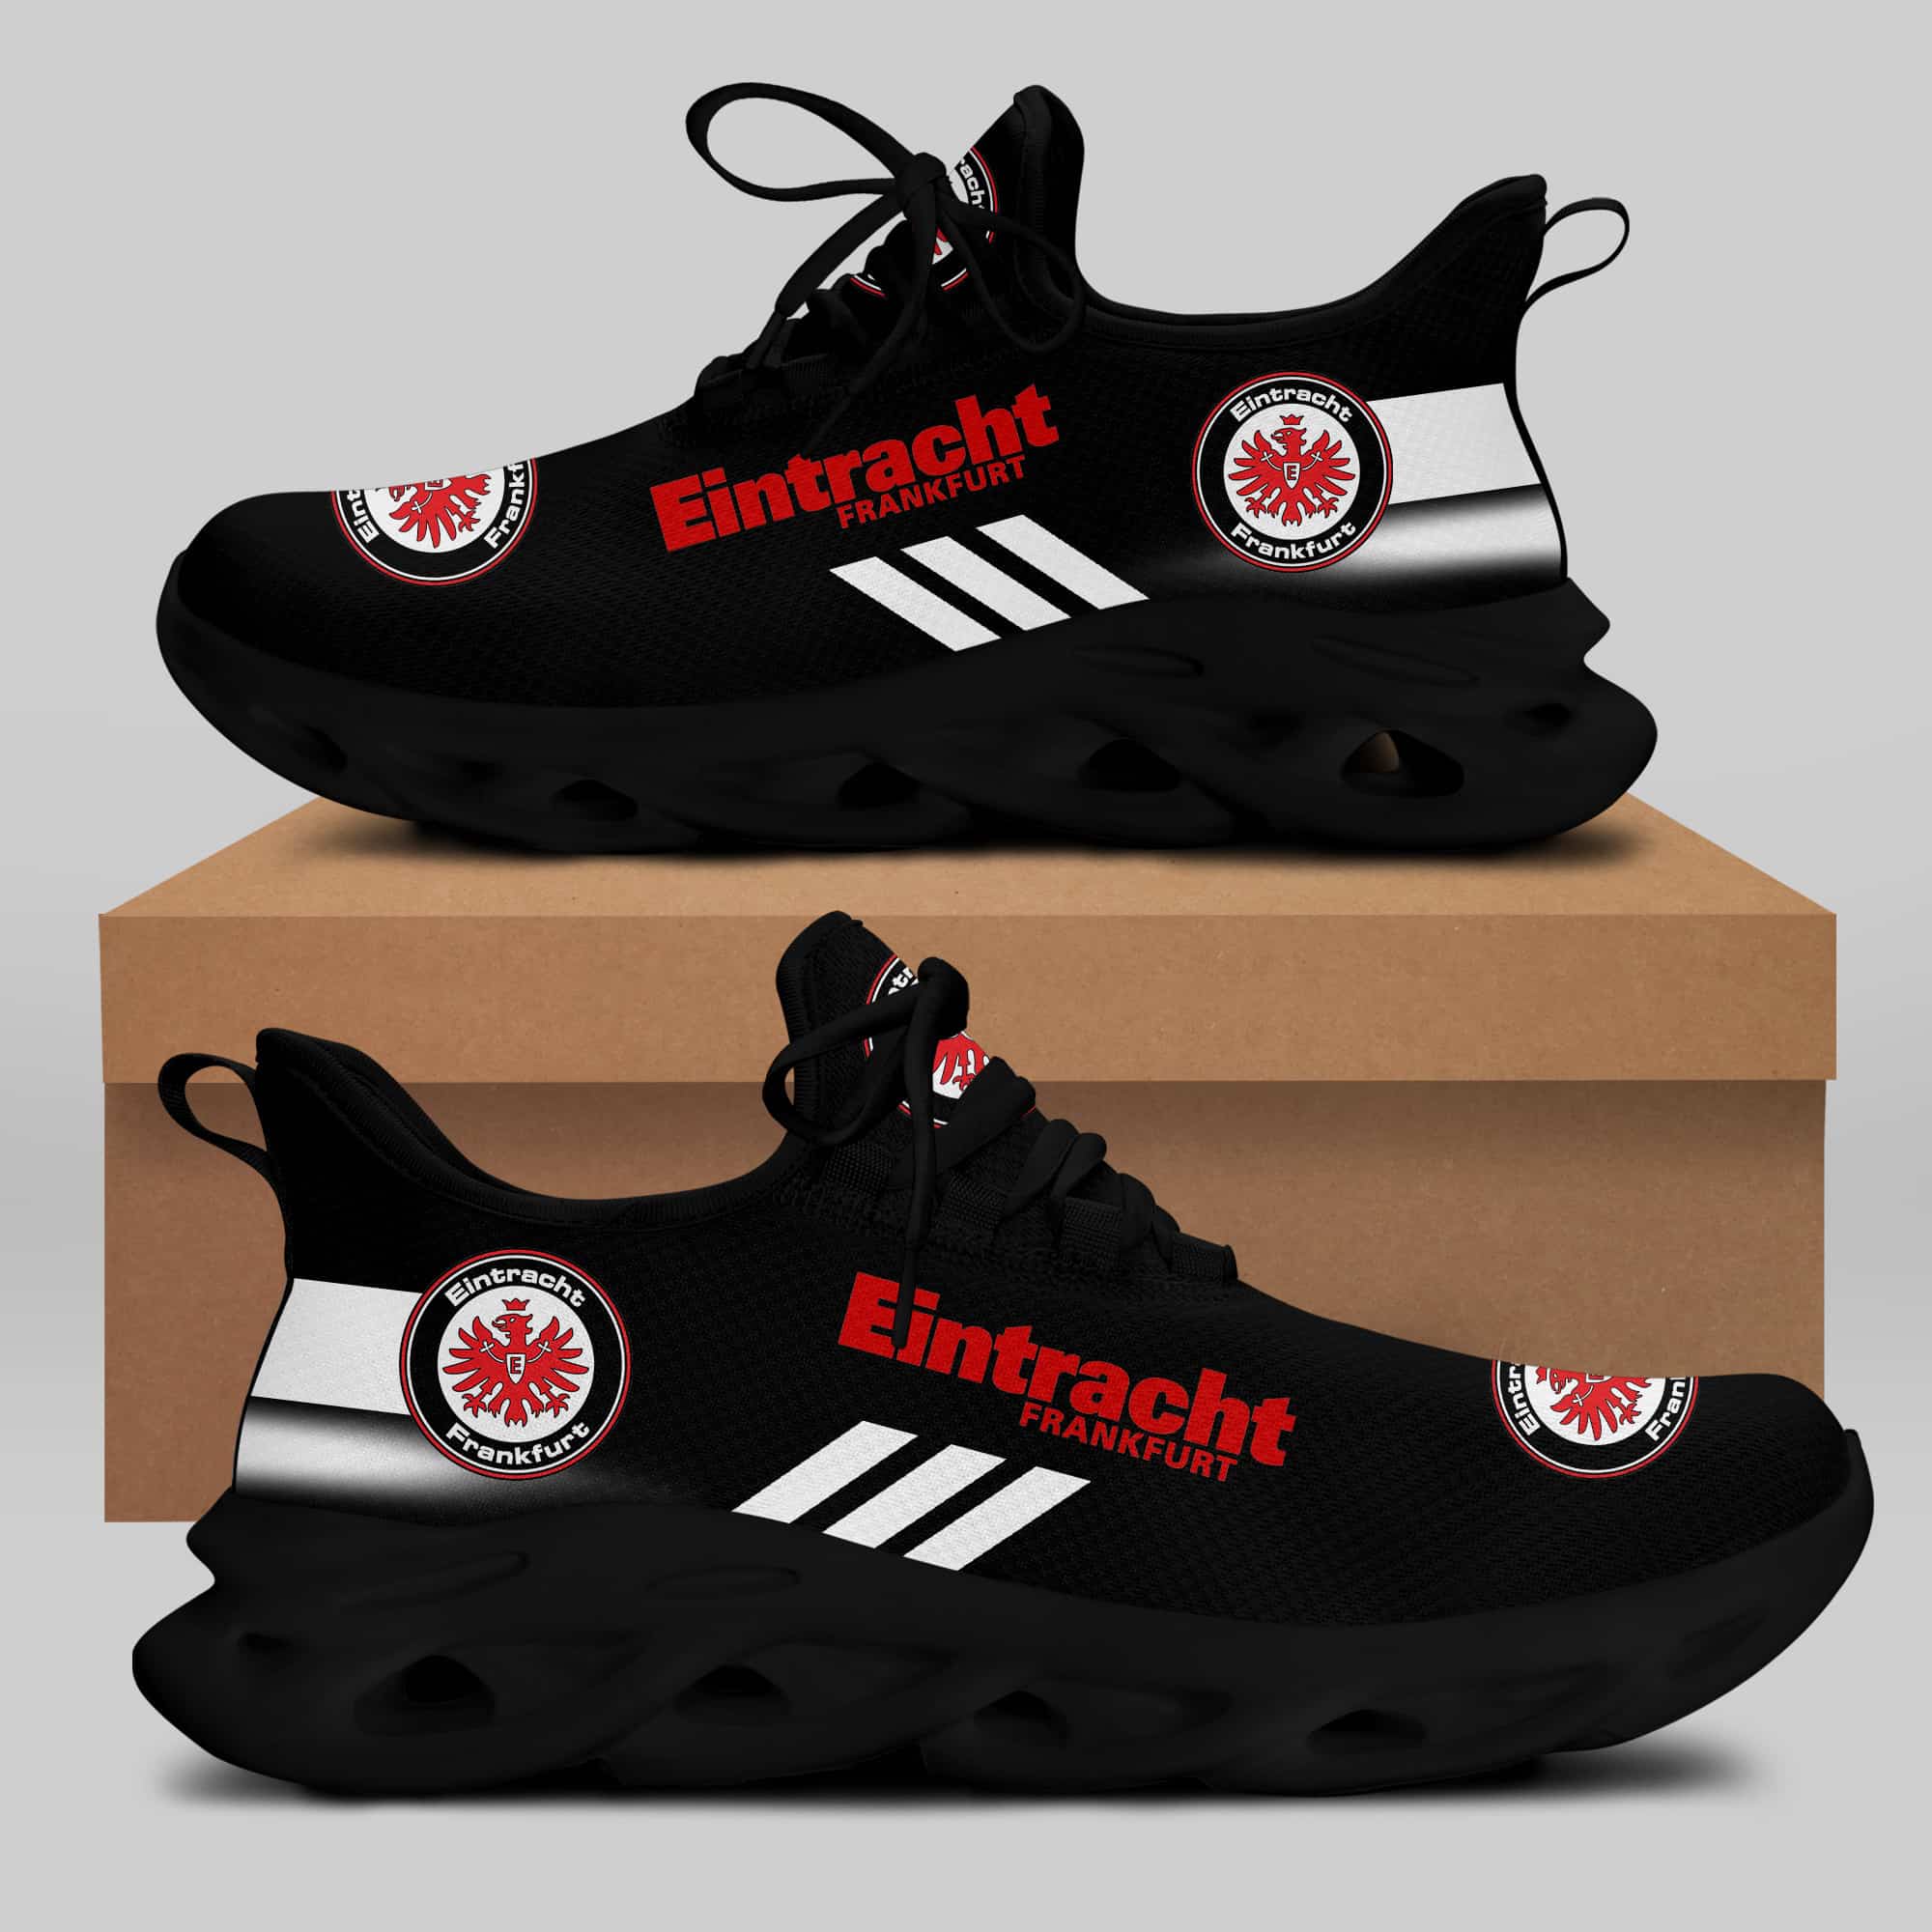 Eintracht Frankfurt Running Shoes Max Soul Shoes Sneakers Ver 10 1